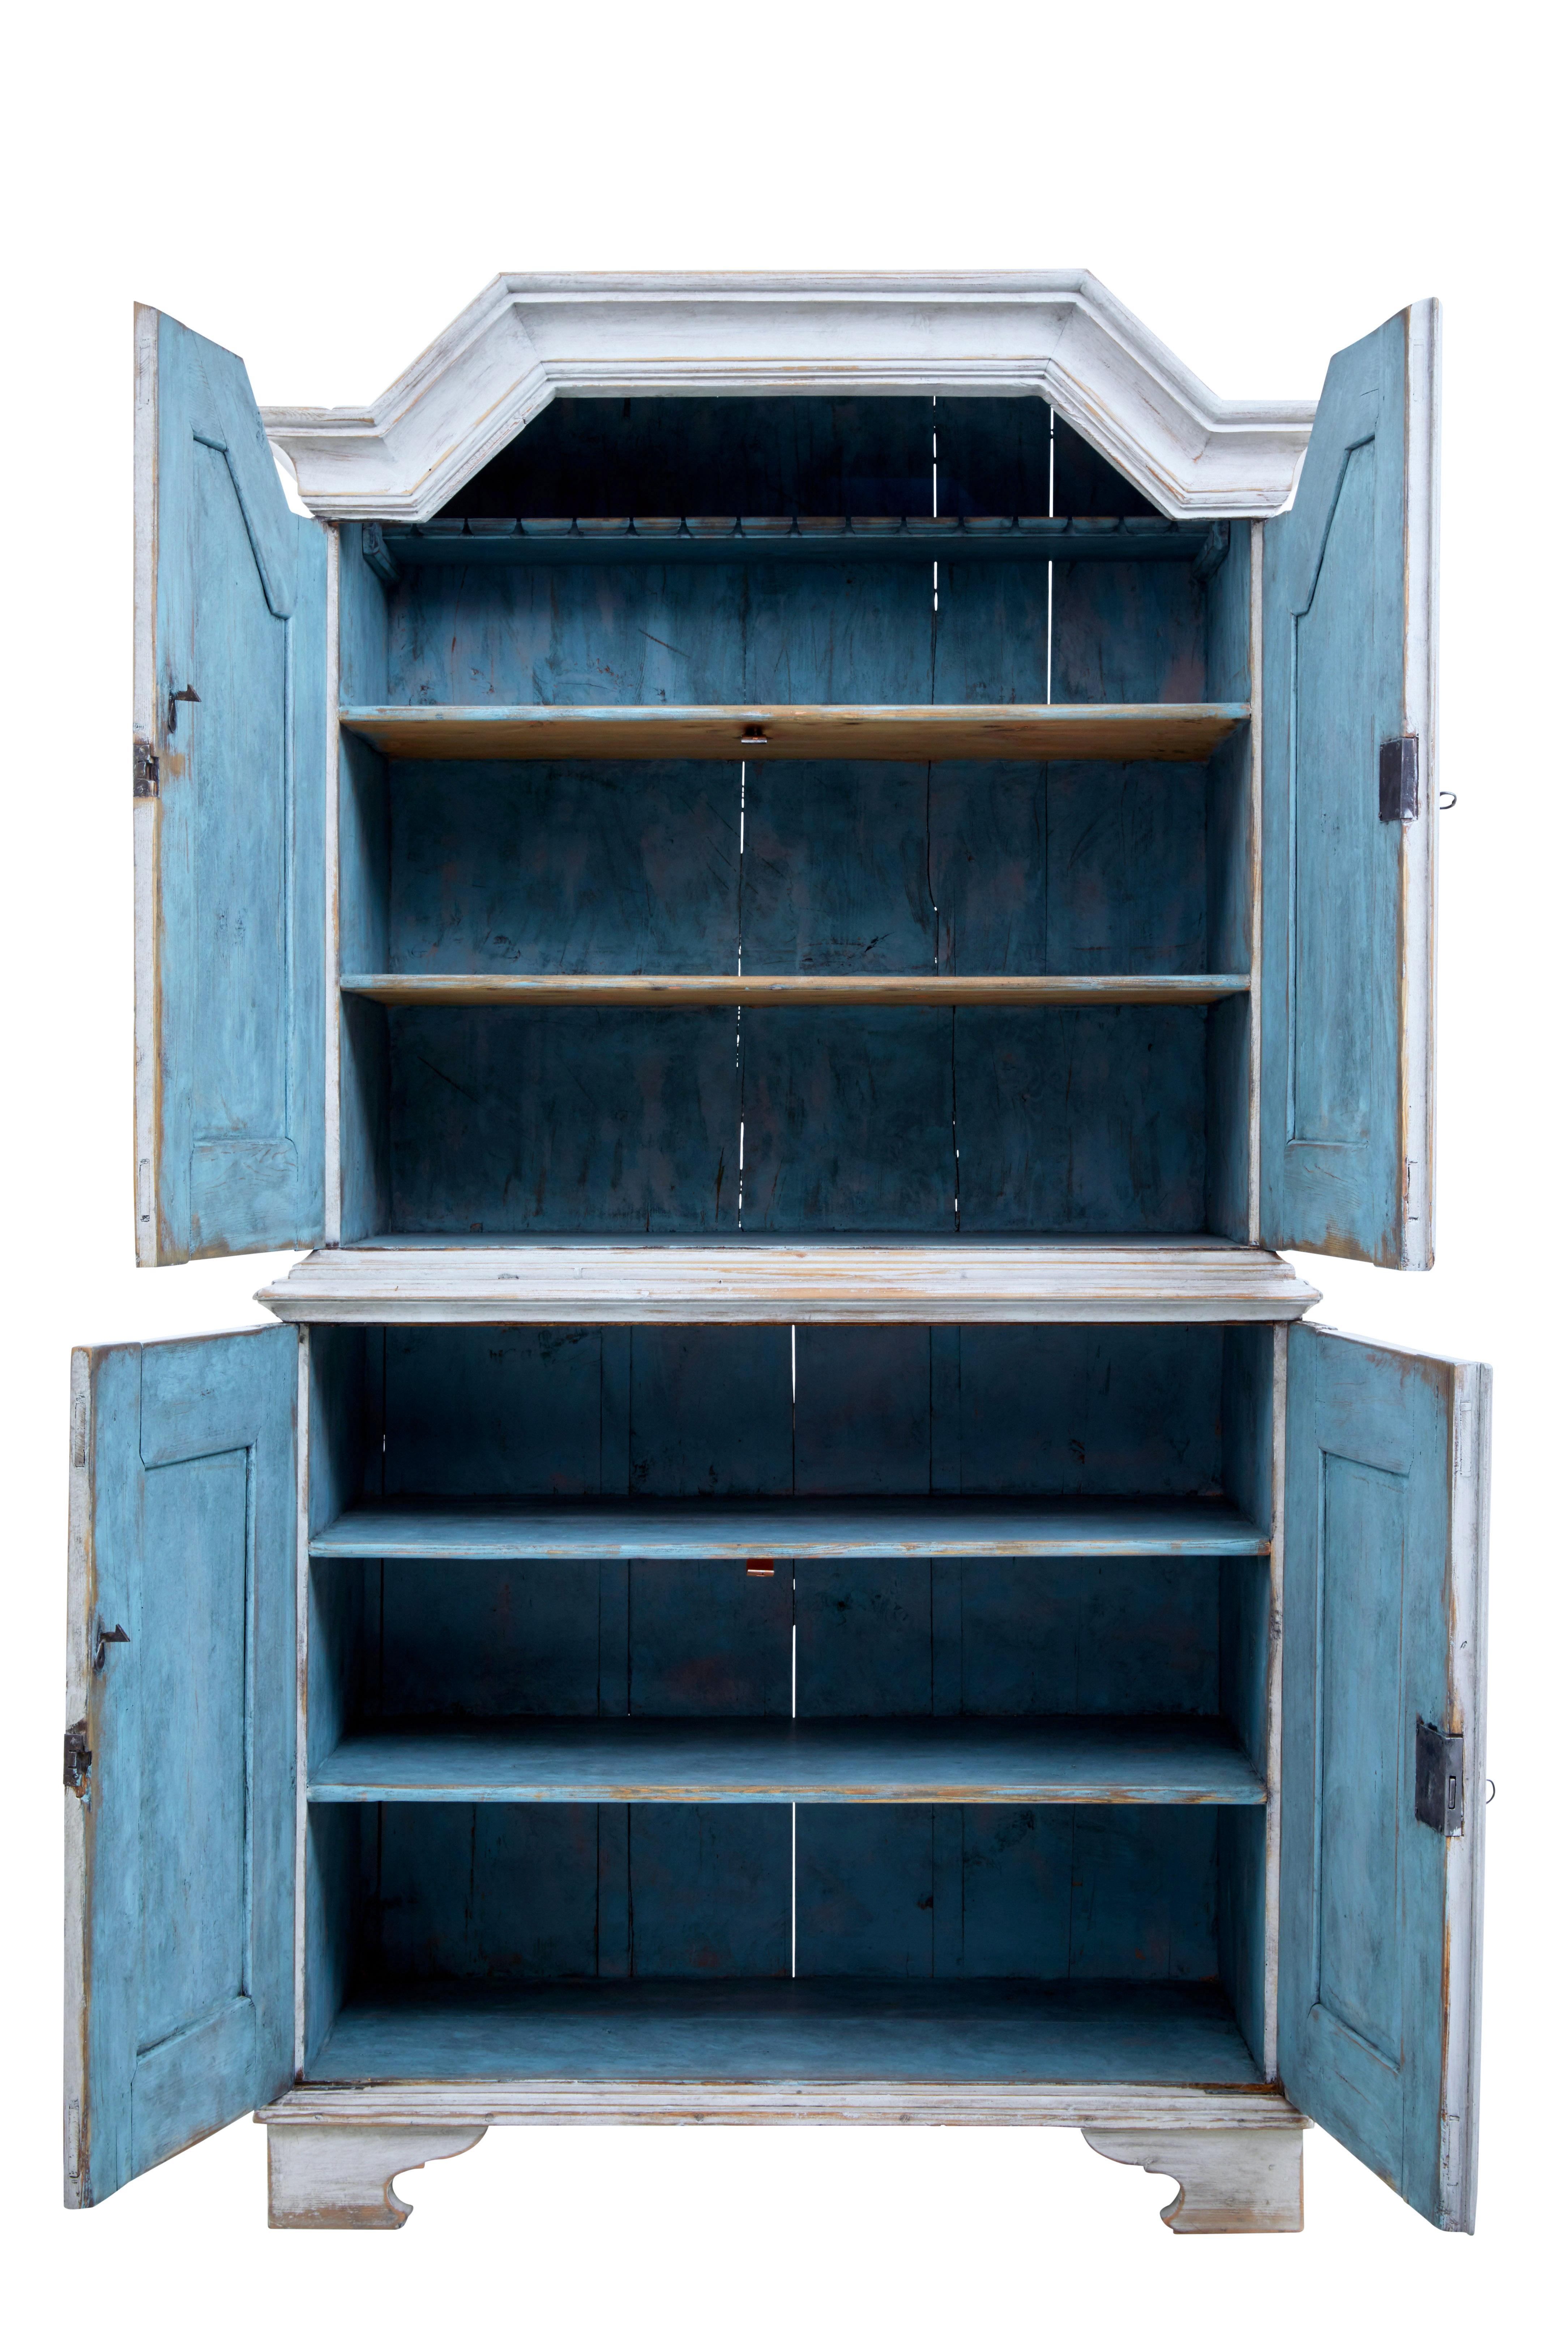 Swedish 19th century painted pine tall cupboard, circa 1860.

Top section with architectural pediment, fitted with 2 fixed shelves and a shallow storage rack. Bottom section with double doors containing 2 fixed shelves.

Original working locks